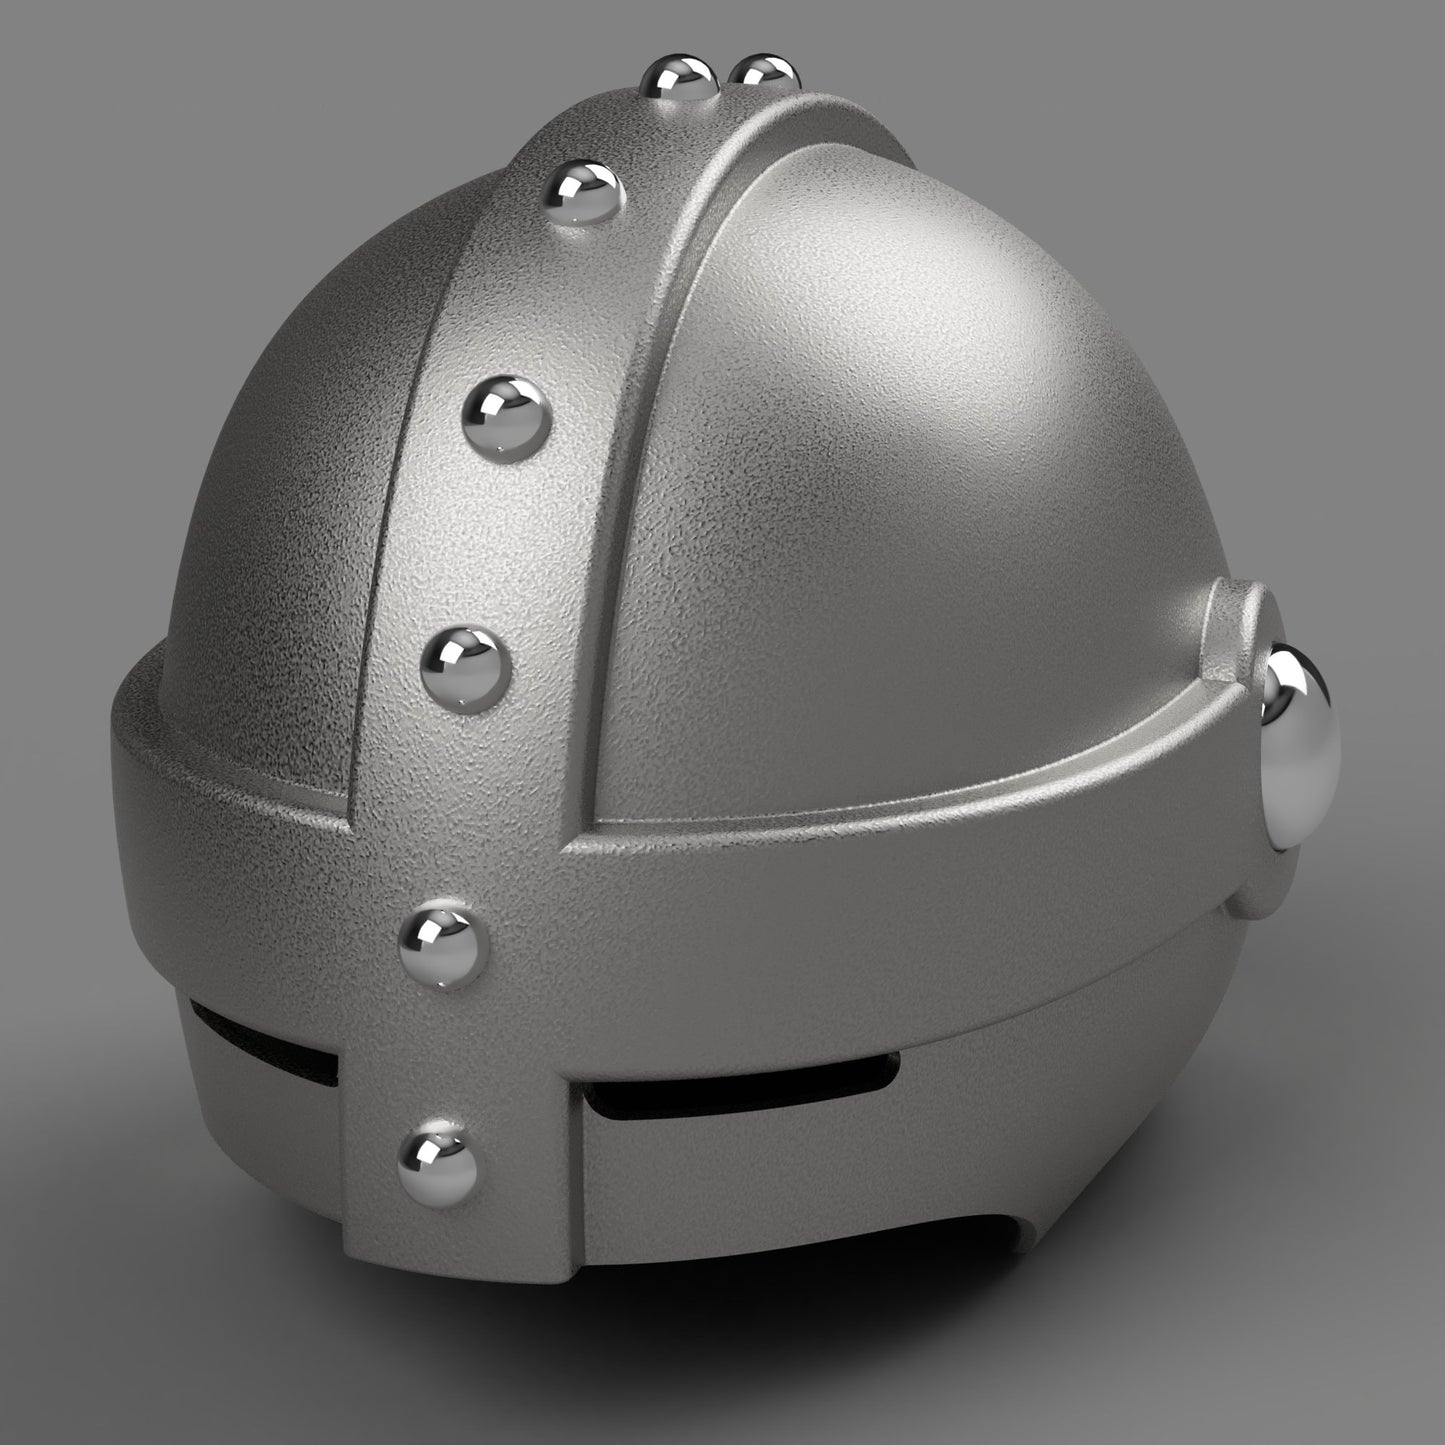 Angemon Digimon Inspired helmet 3d printable ***STL file*** Lord and Lady Towers